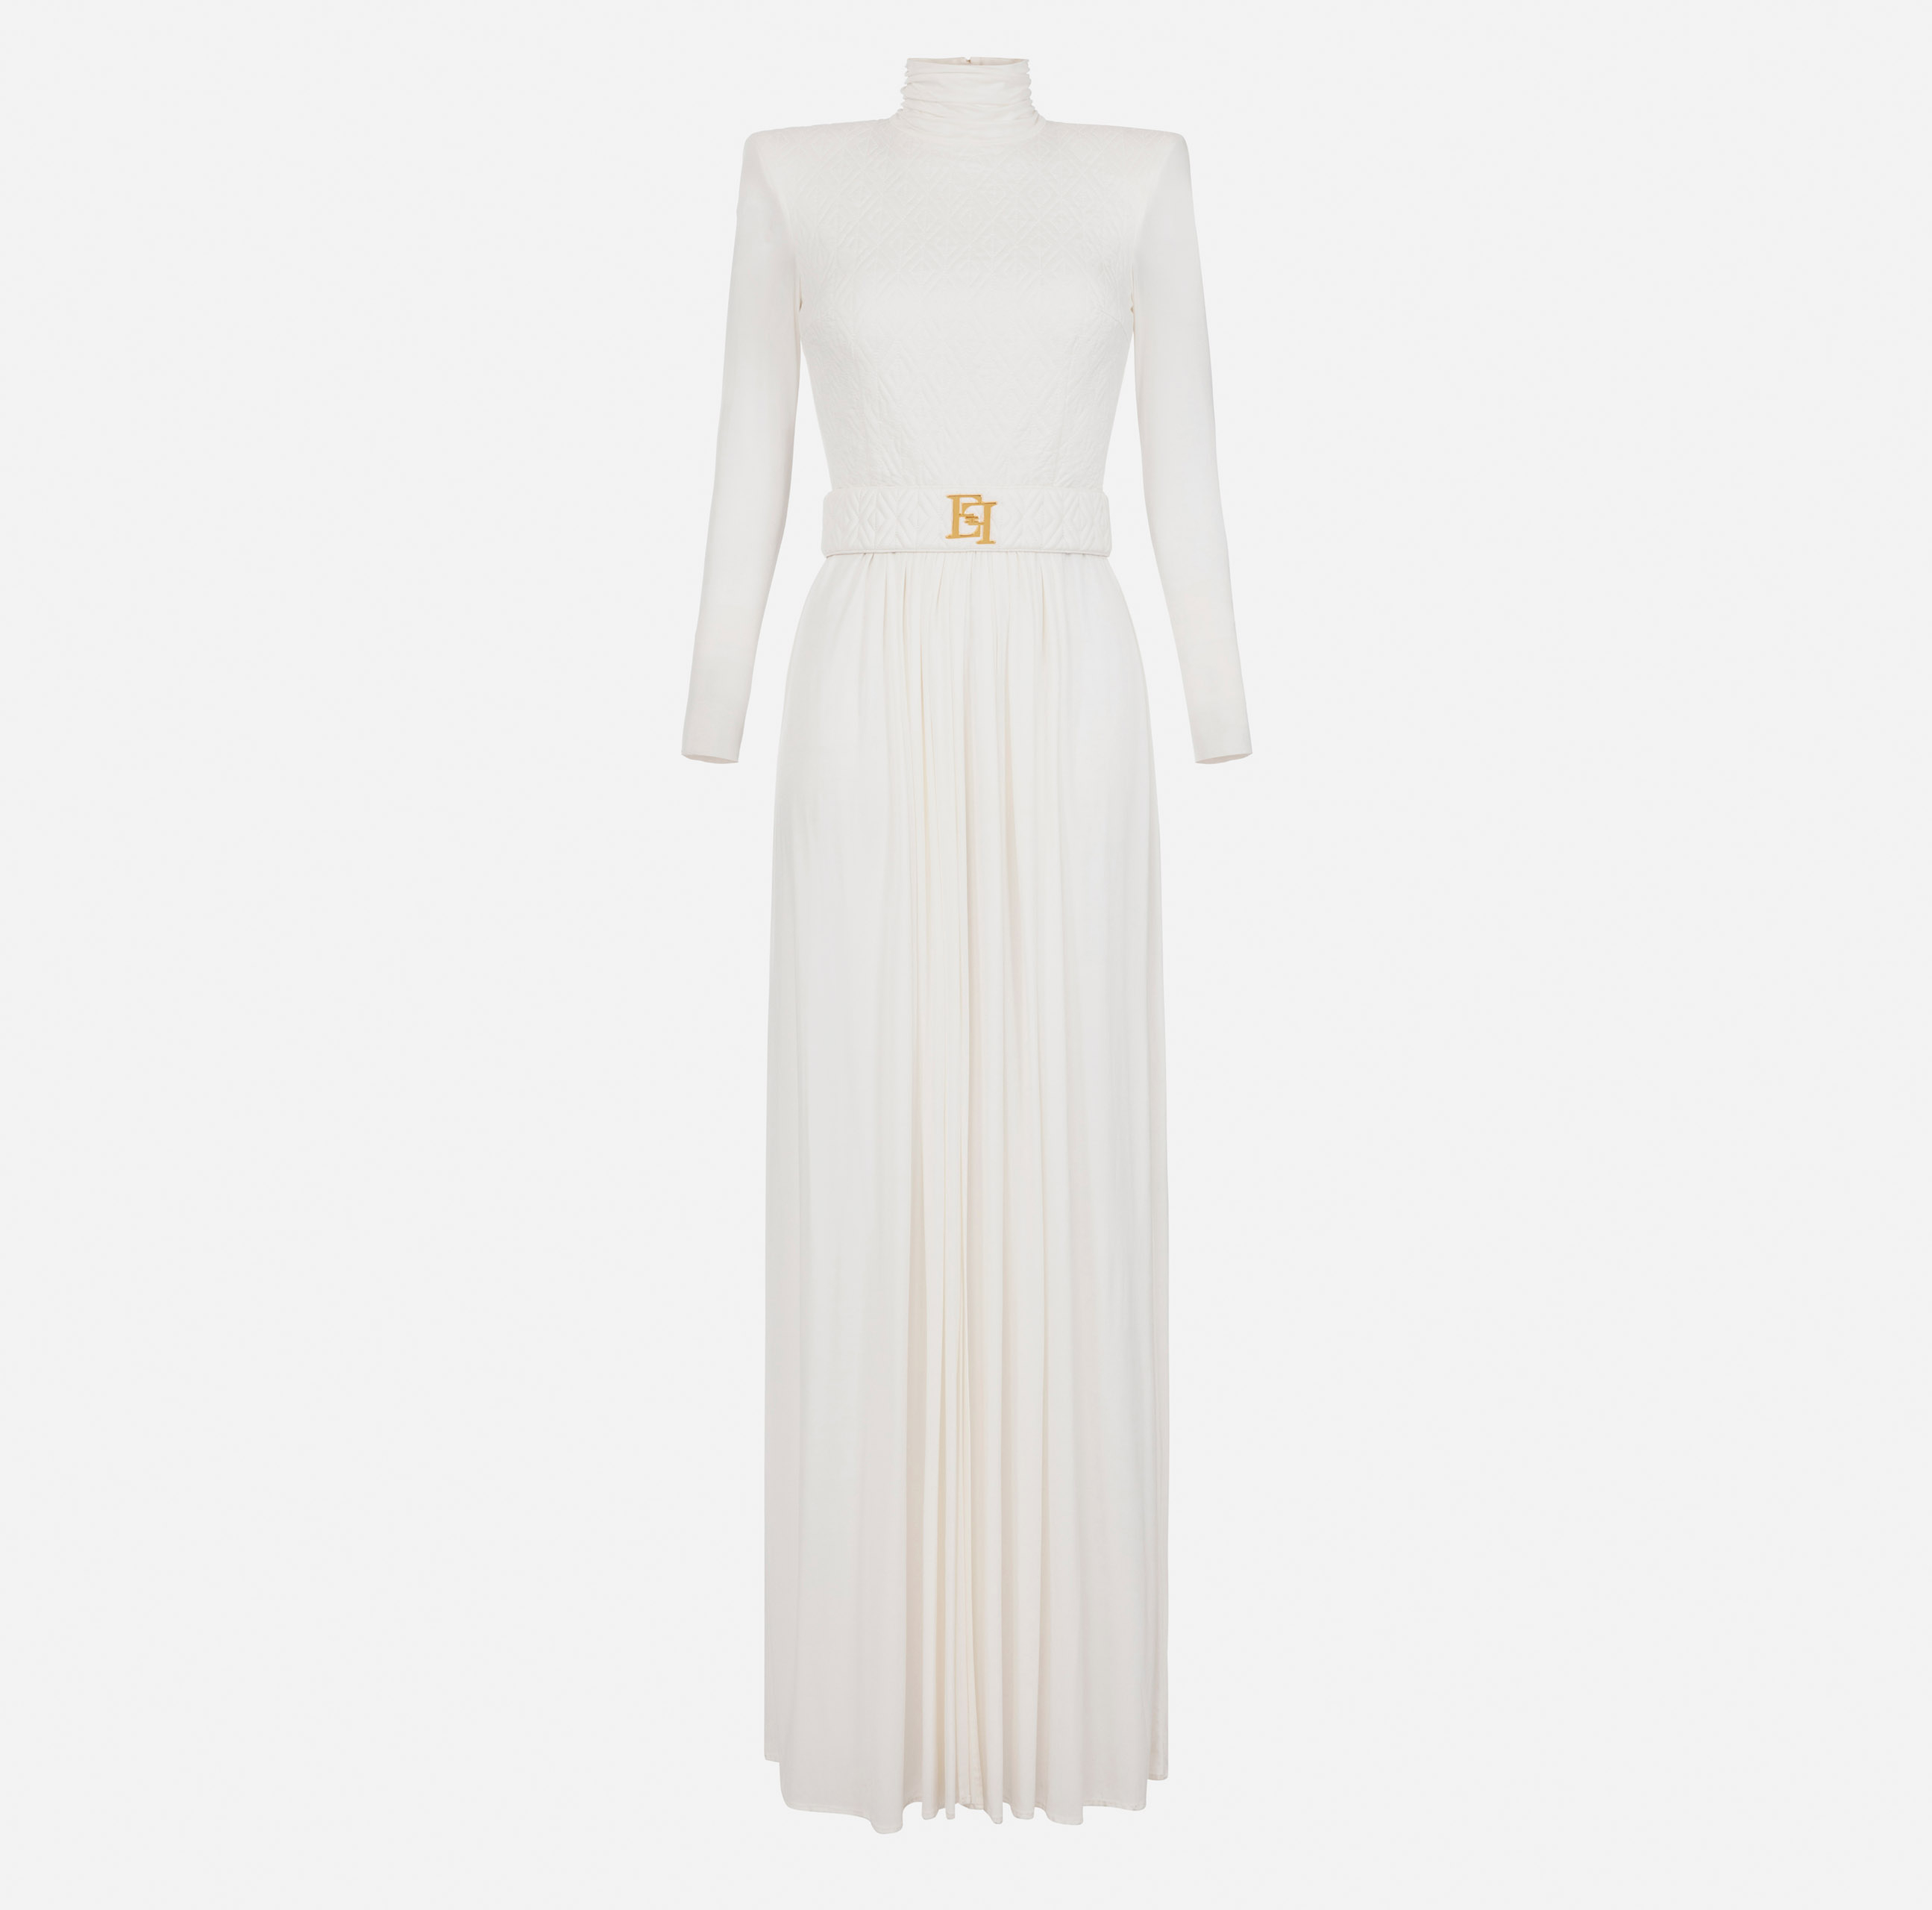 Red Carpet dress in jersey with embossed embroidery - Elisabetta Franchi